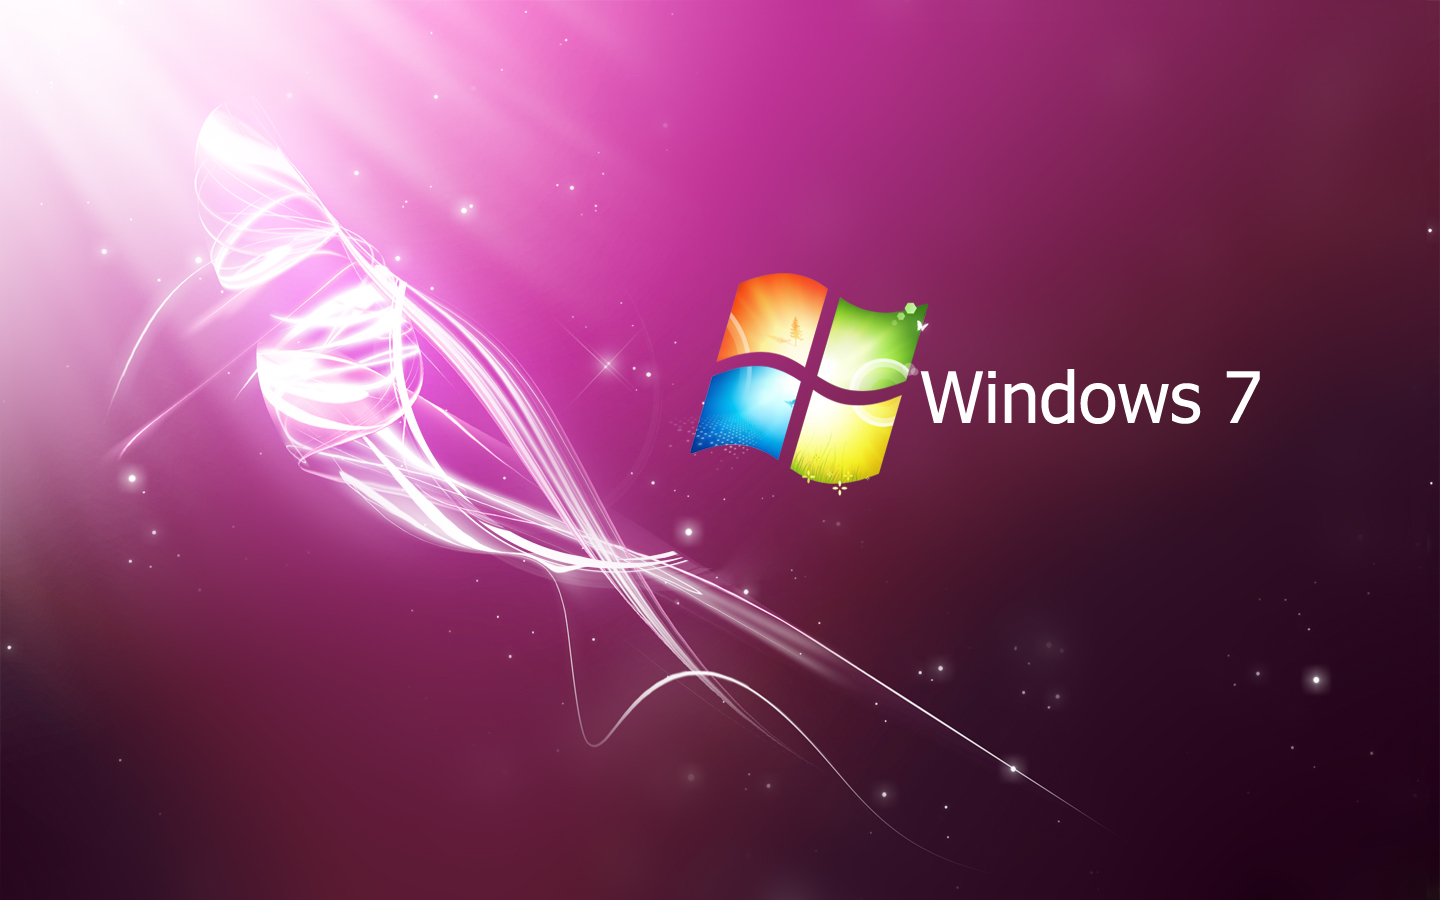 Free download Windows 7 Wallpapers TipTop 3D HD Wallpapers Collection  [1440x900] for your Desktop, Mobile & Tablet | Explore 50+ Windows 7  Wallpapers 3D HD | Windows 7 Background Hd, Windows 7 Wallpaper Hd, Hd Windows  7 Wallpapers